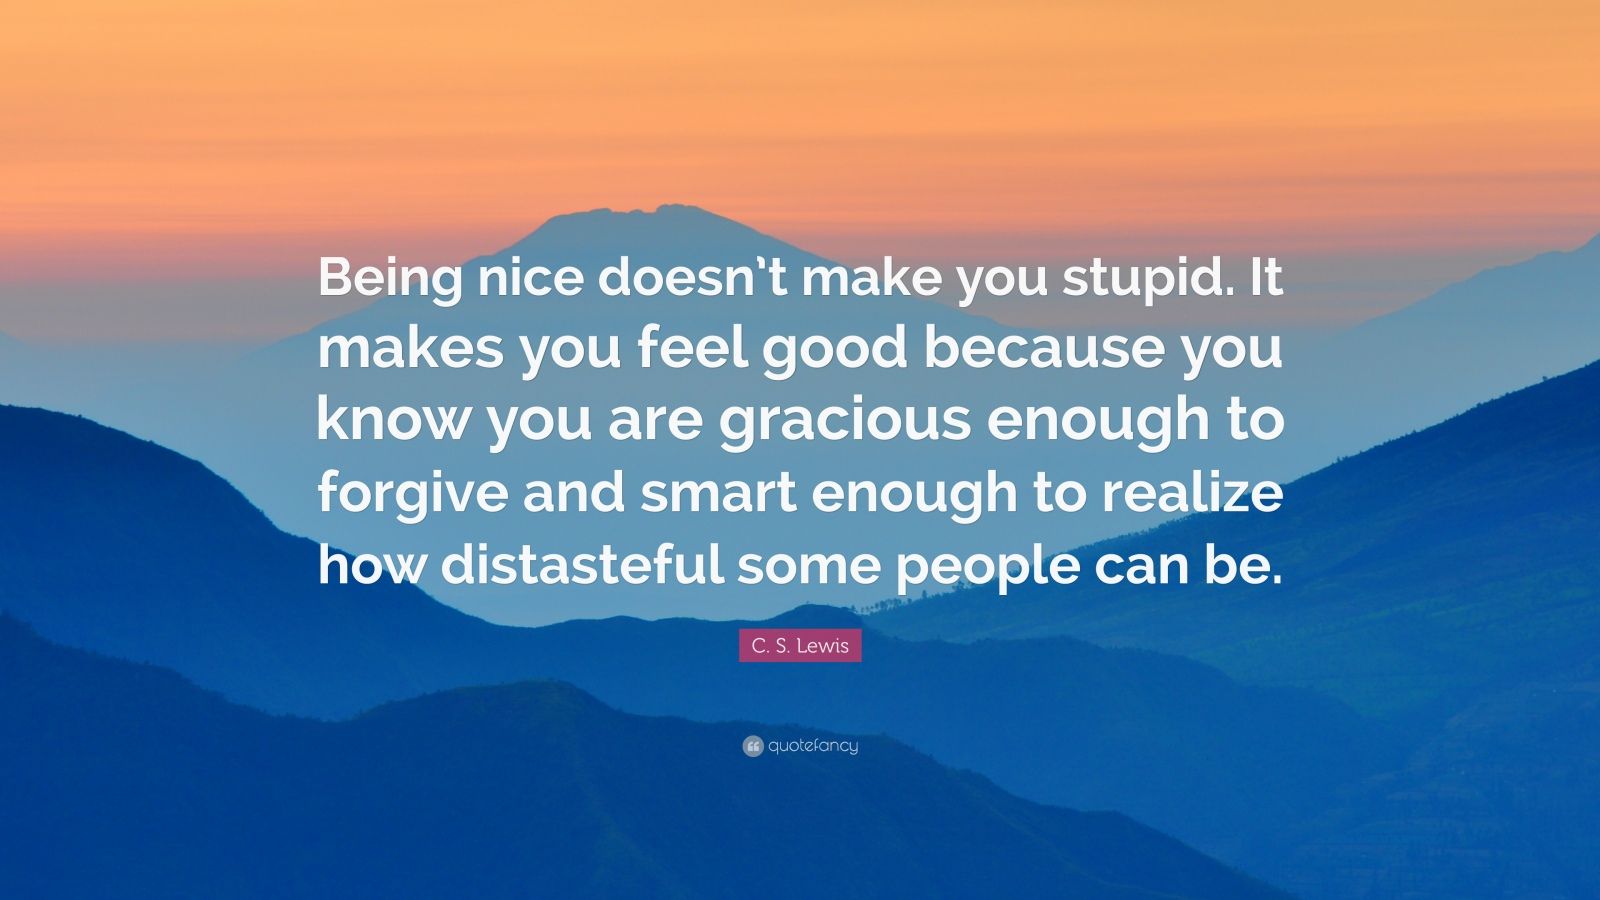 C. S. Lewis Quote: “Being nice doesn’t make you stupid. It makes you